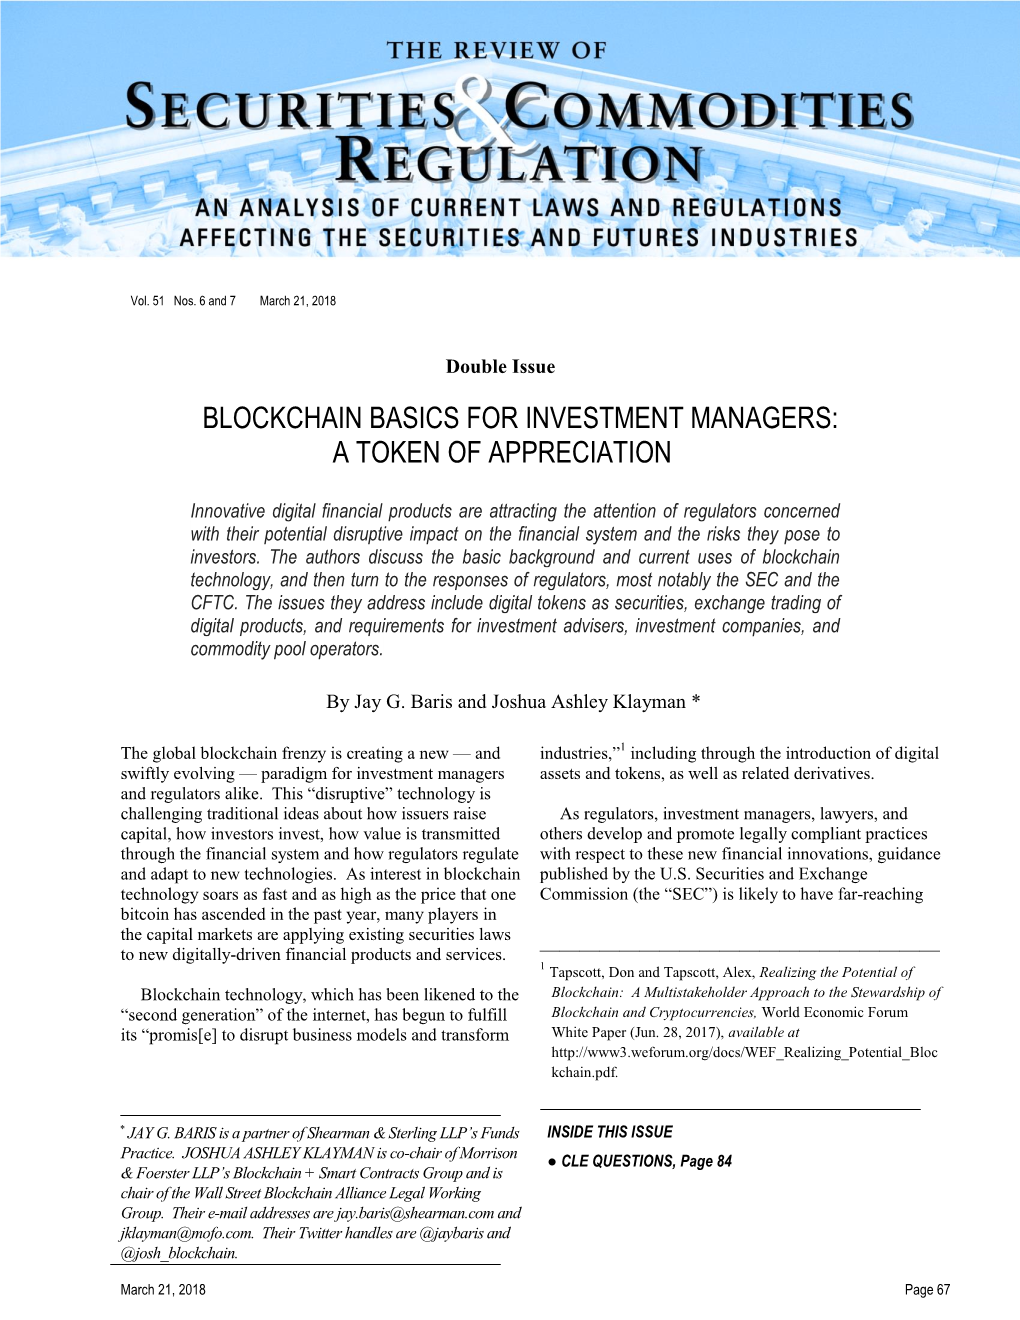 Blockchain Basics for Investment Managers: a Token of Appreciation